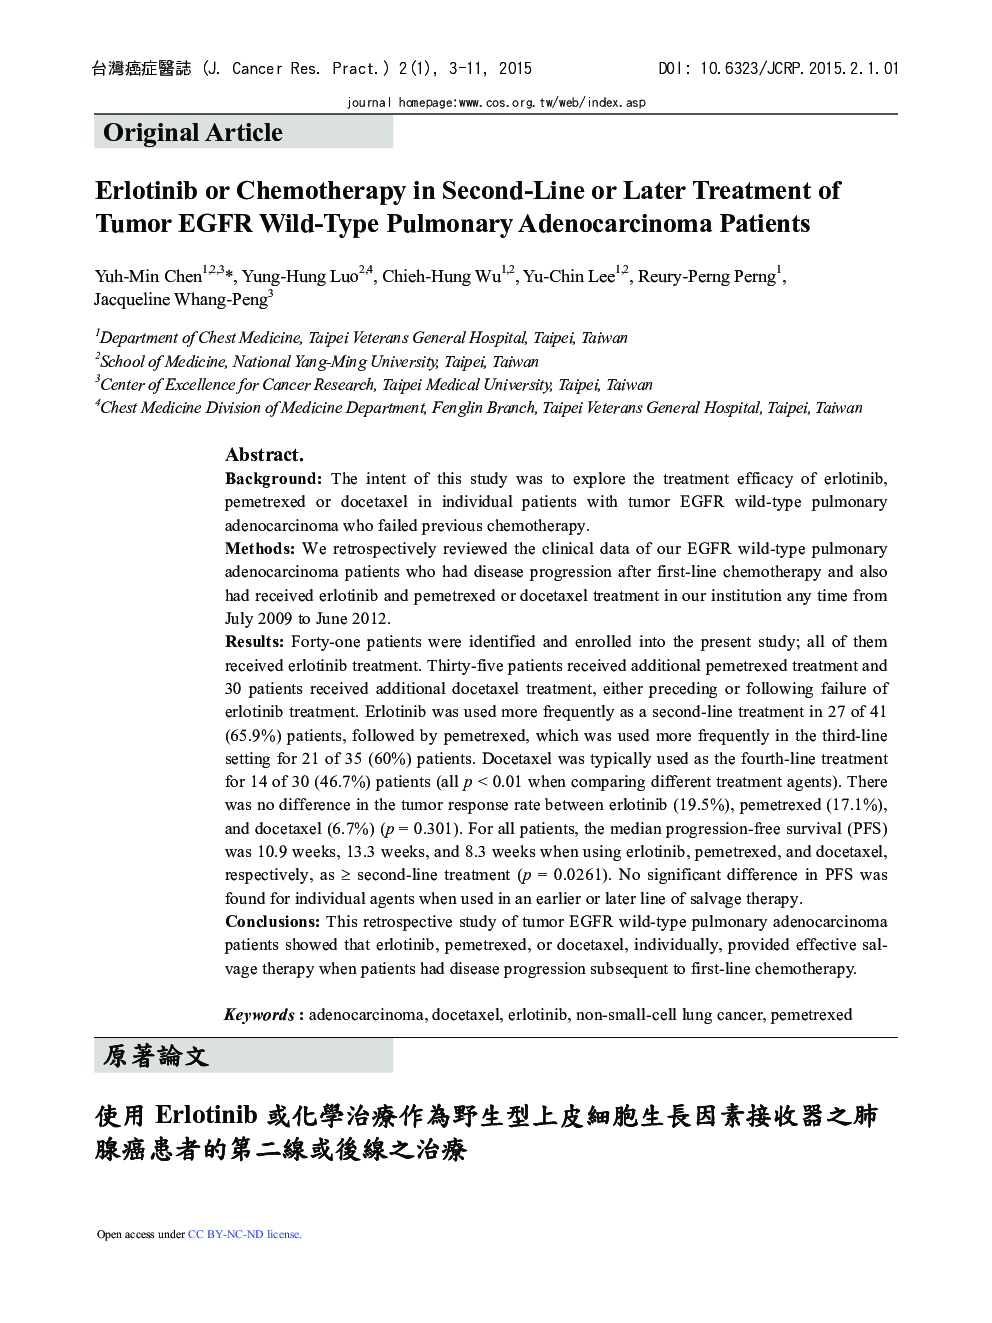 Erlotinib or Chemotherapy in Second-Line or Later Treatment of Tumor EGFR Wild-Type Pulmonary Adenocarcinoma Patients